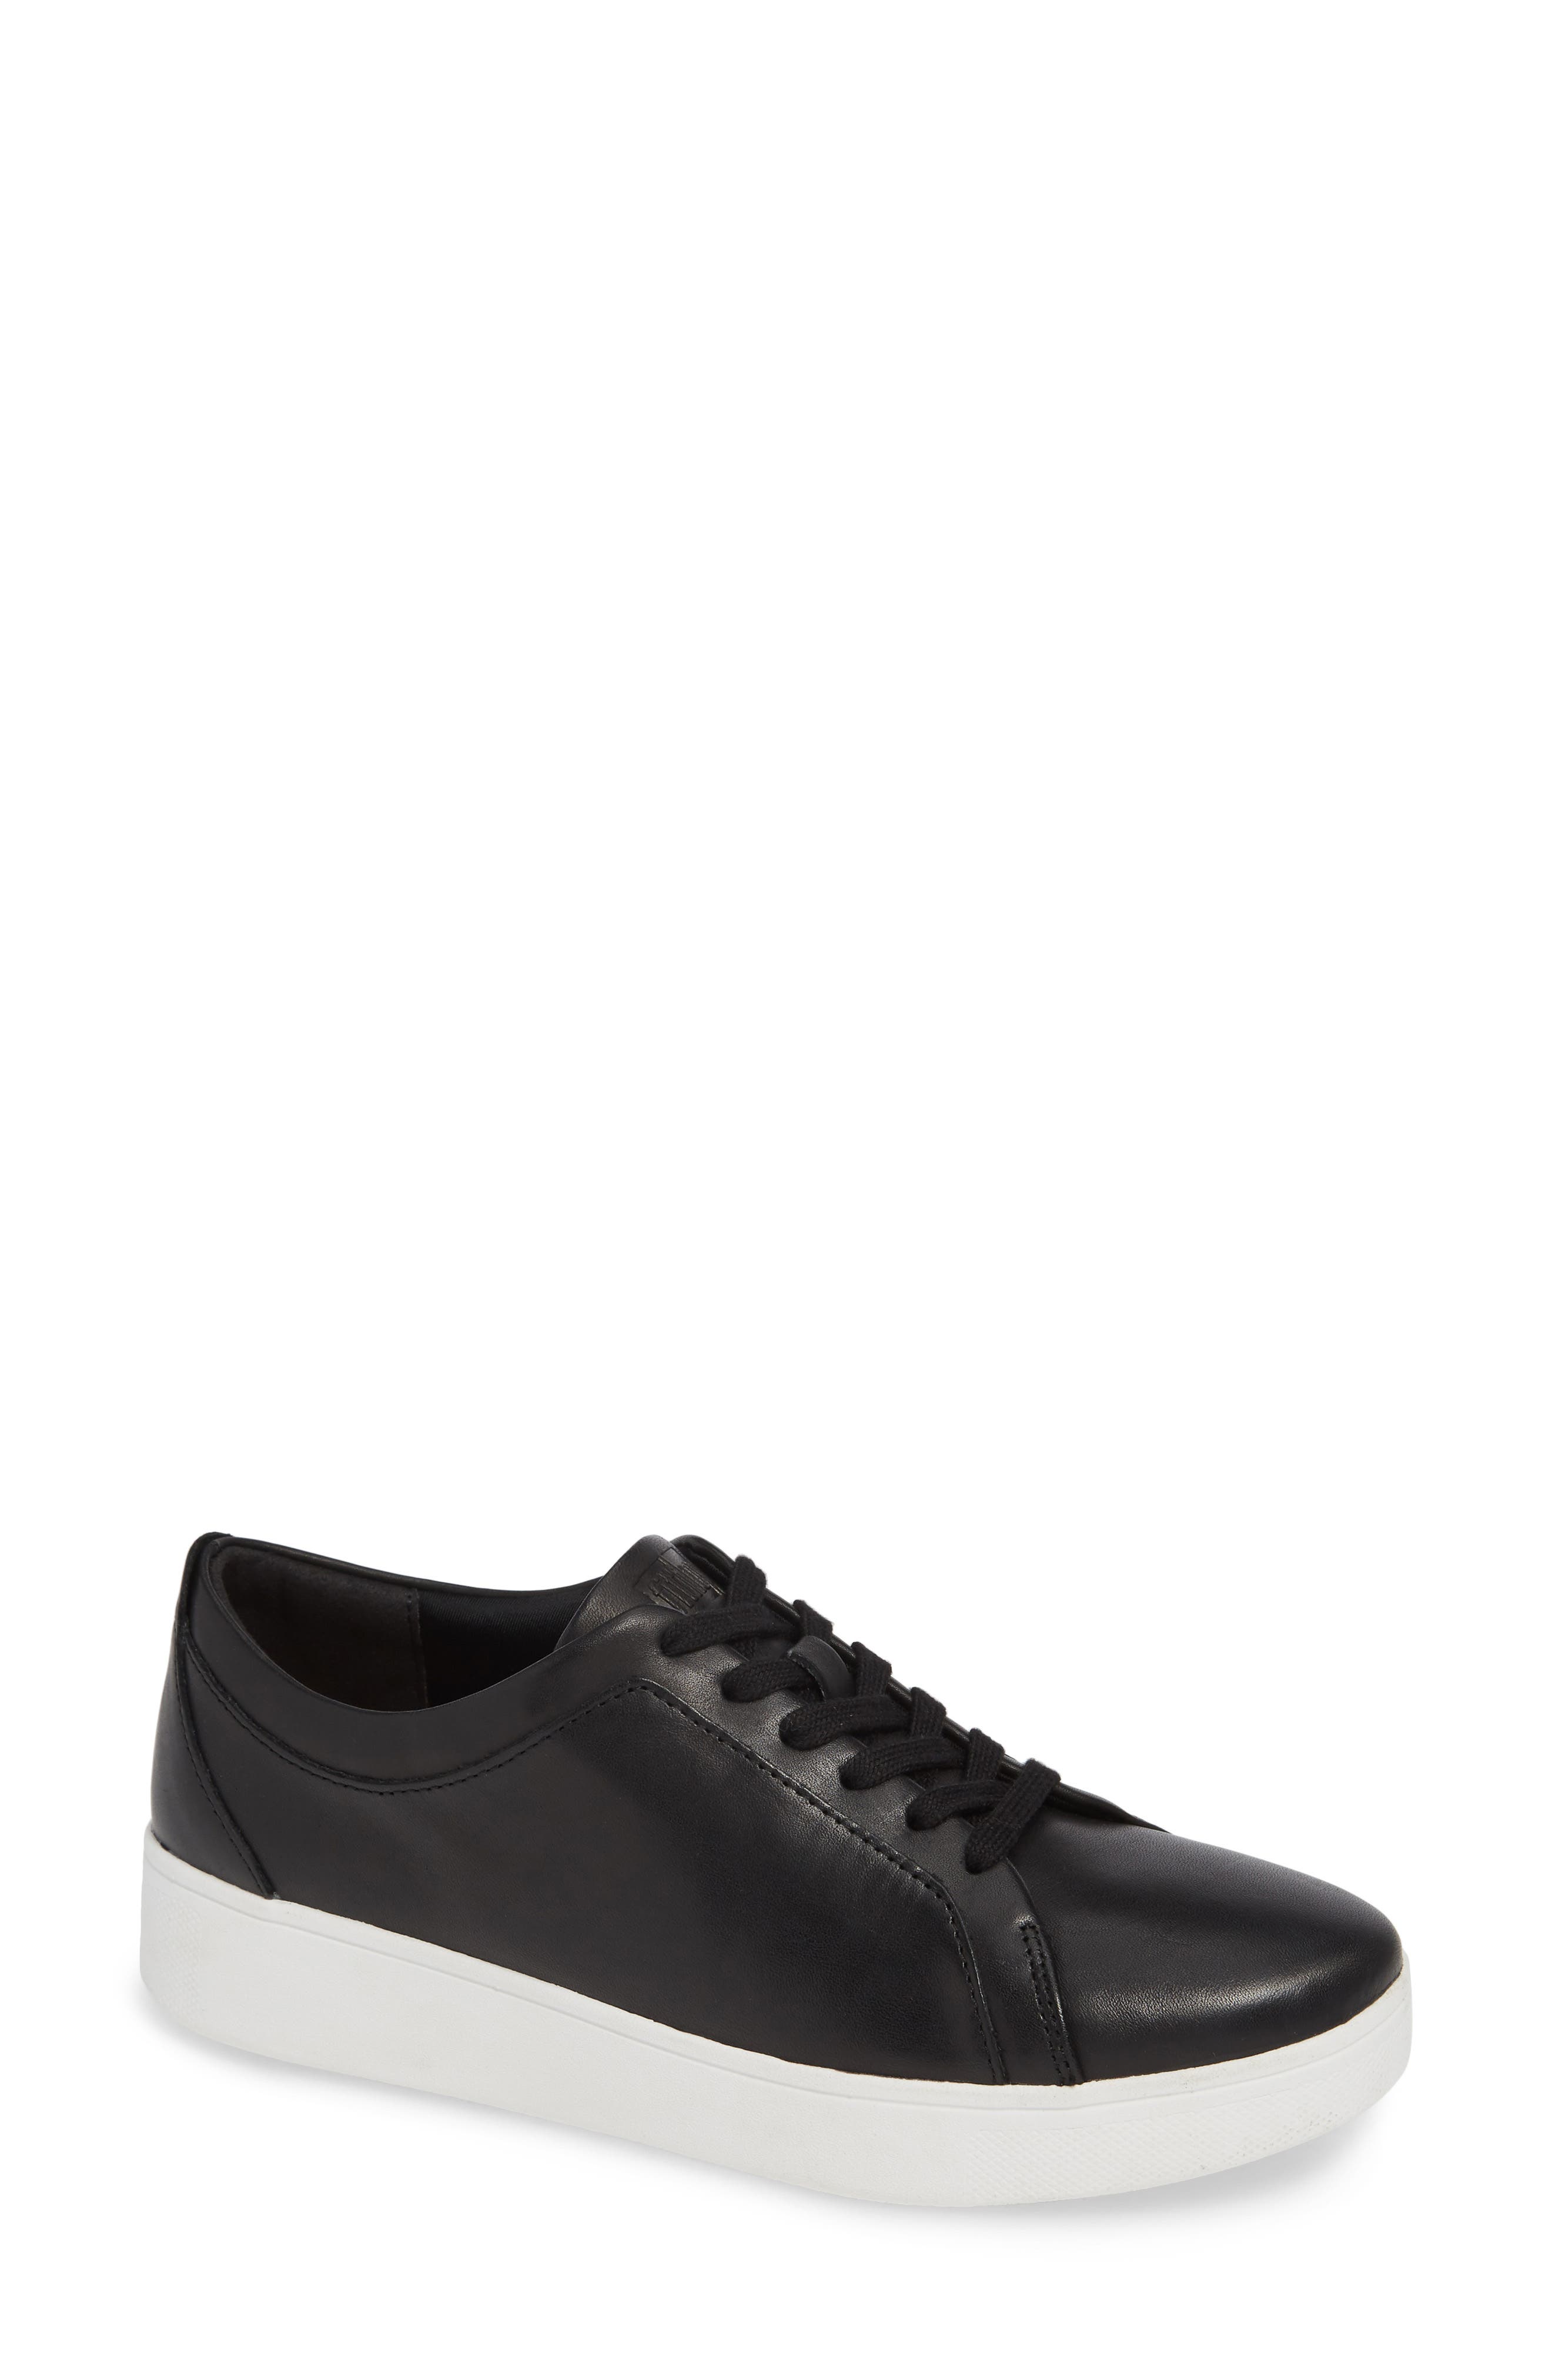 fitflop rally leather sneakers